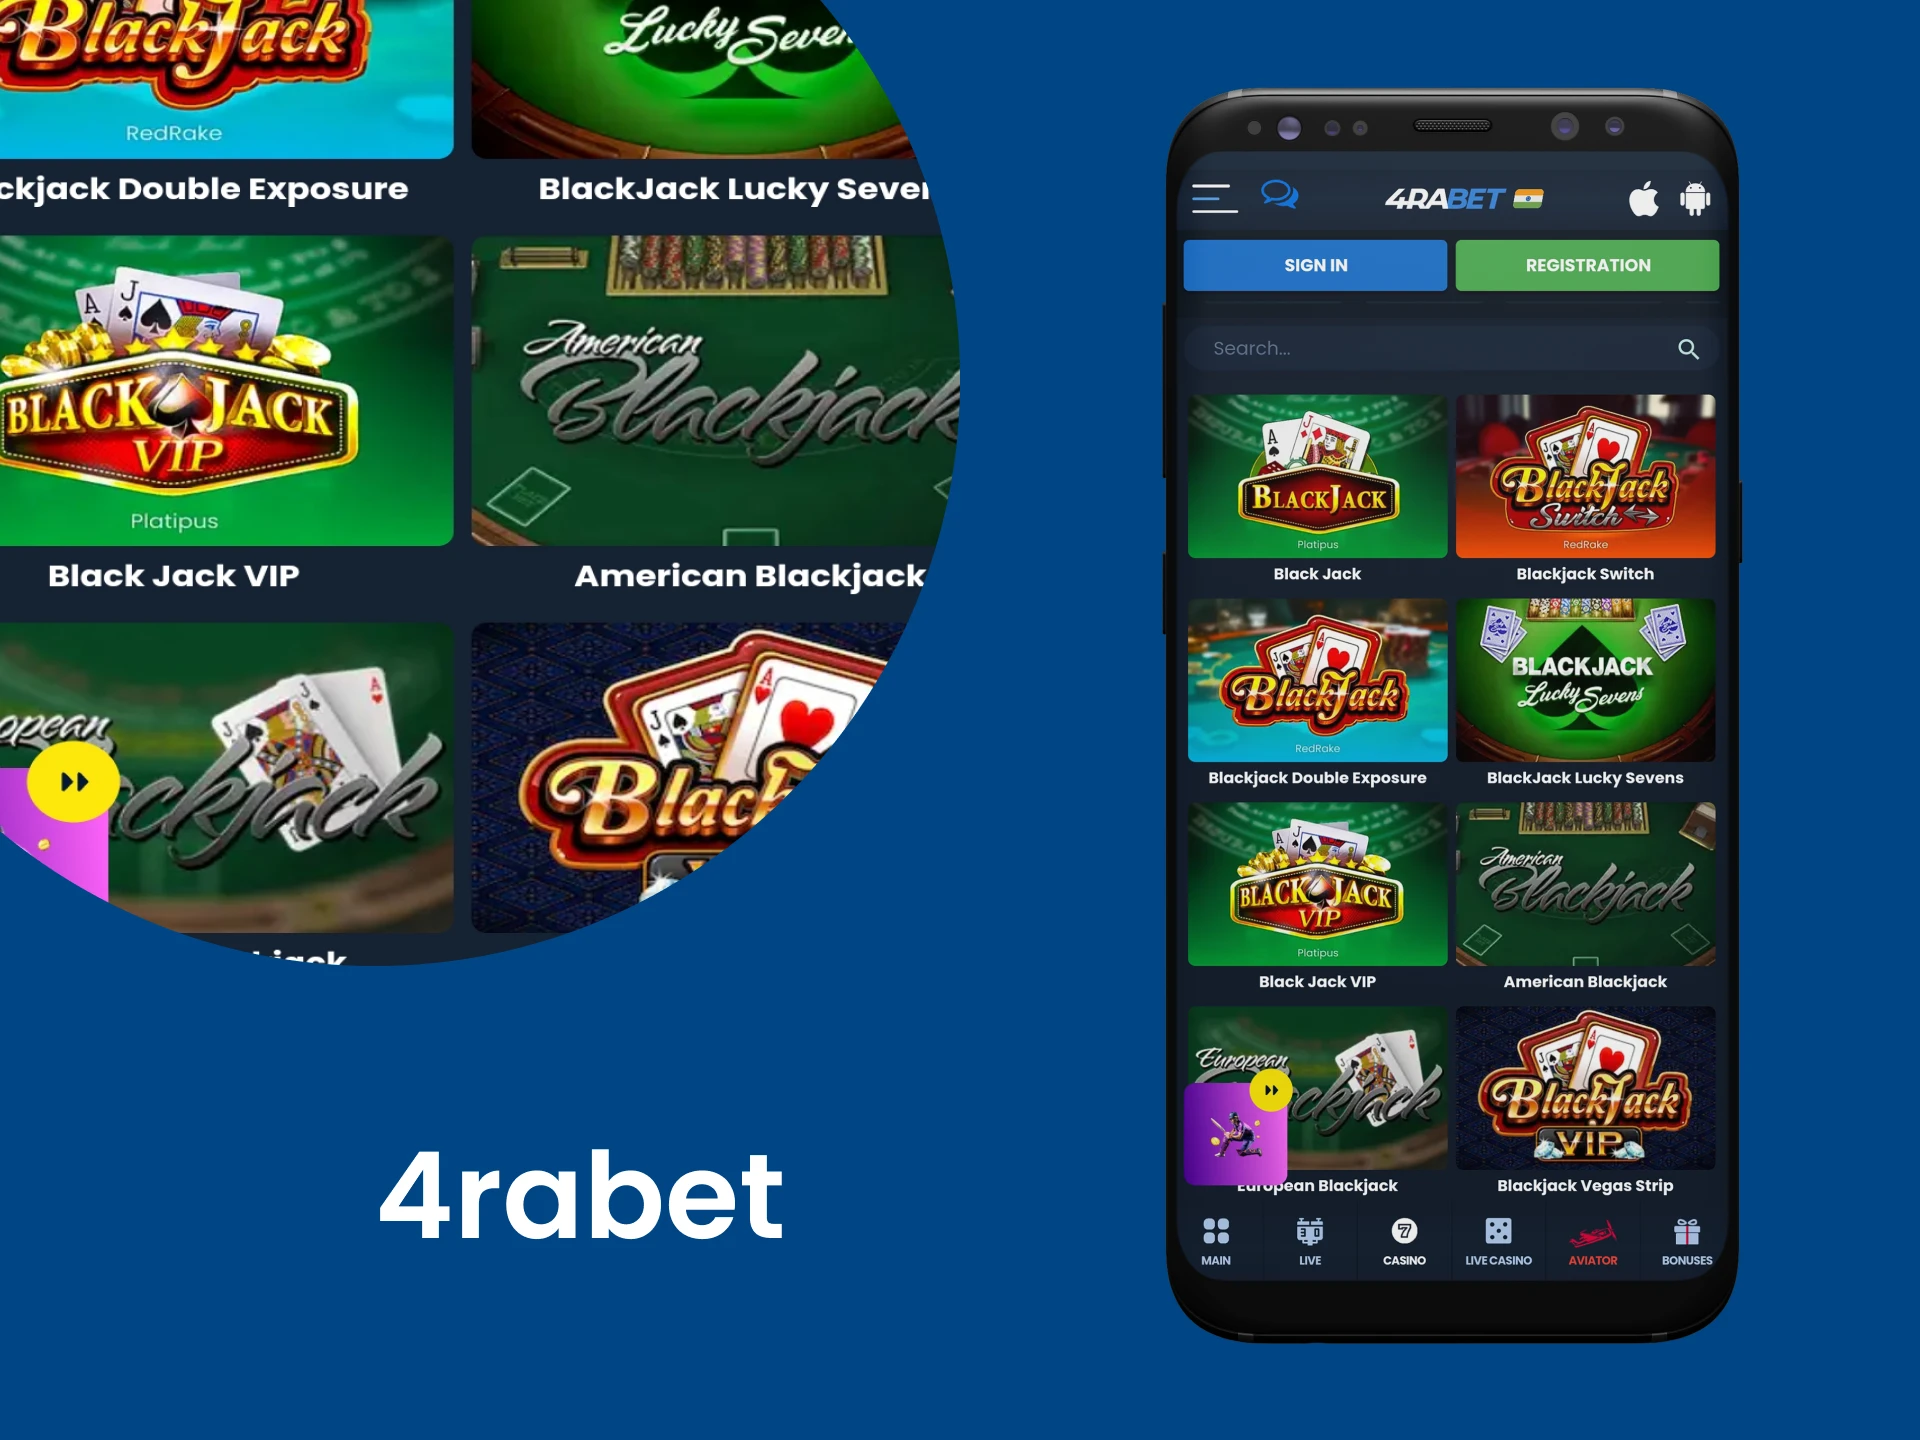 Play BlackJack on your smartphone using the 4rabet app.